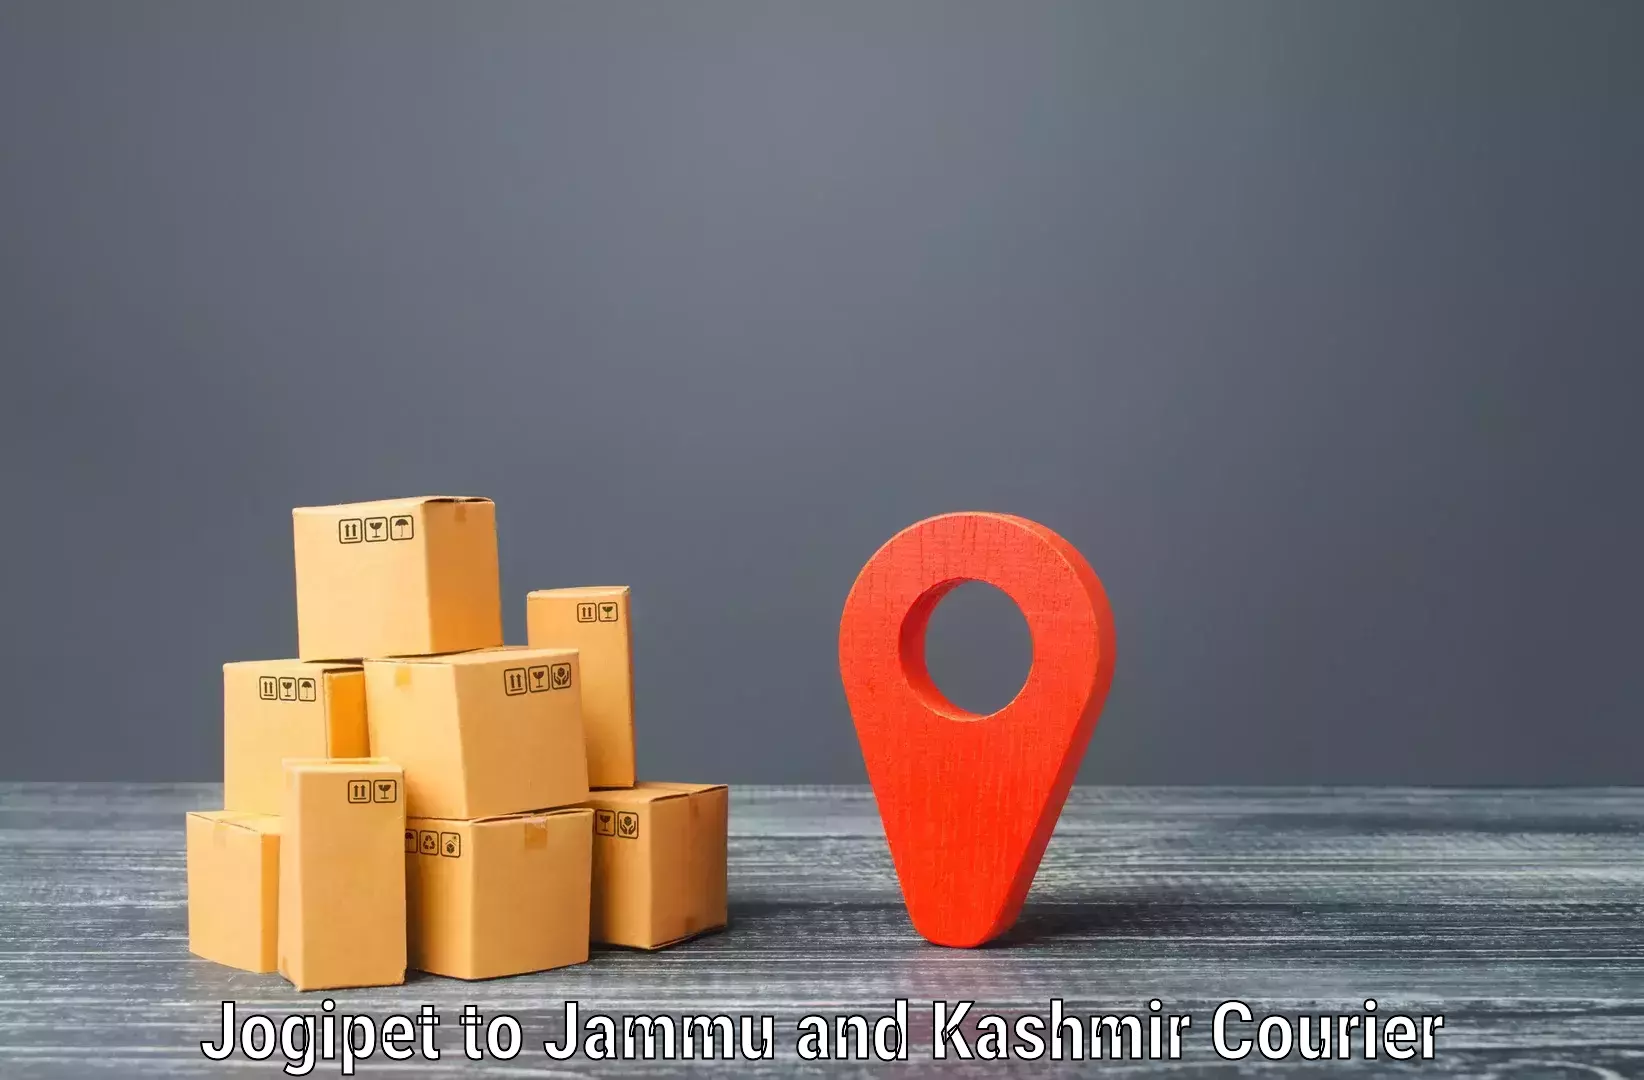 Urgent courier needs Jogipet to Udhampur